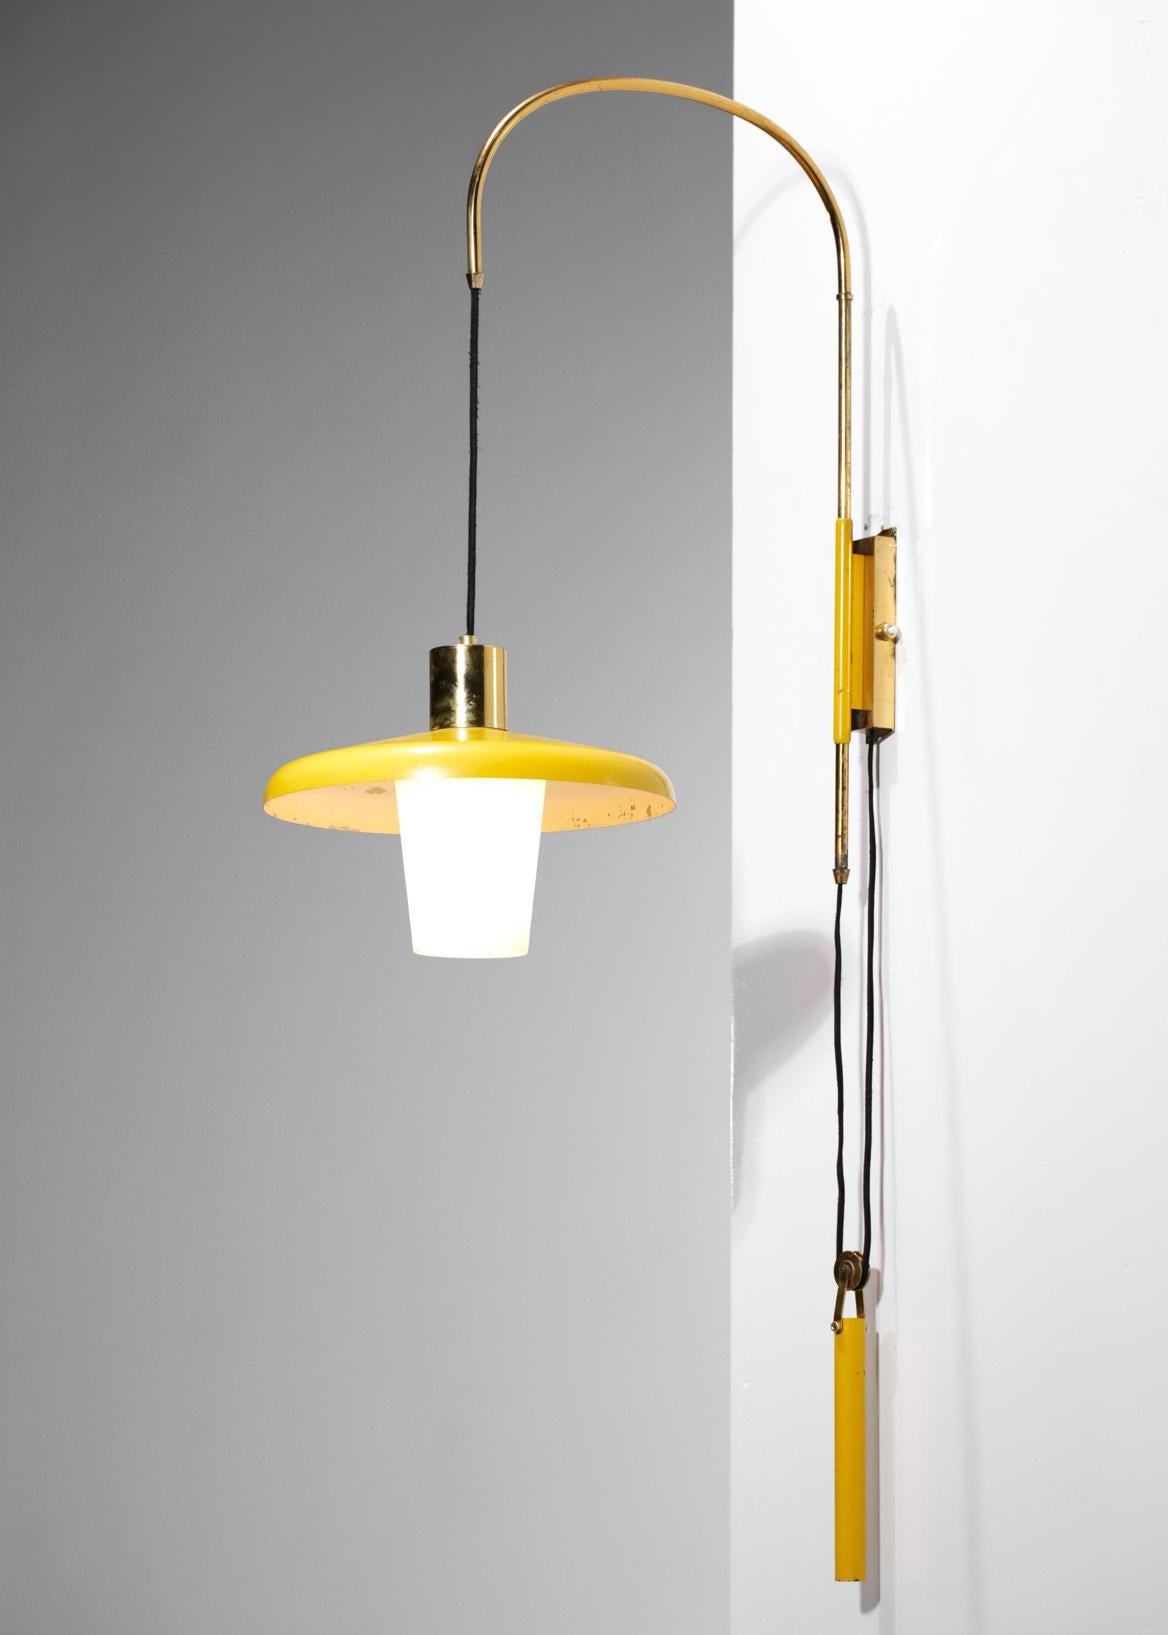 Small Italian wall lamp of the 50's attributed to Stilnovo. Structure in solid brass, lampshade, counterweight and wall plate in yellow lacquered metal (original paint). Diffuser in opaque white opaline. Raise and lower system to adjust the height